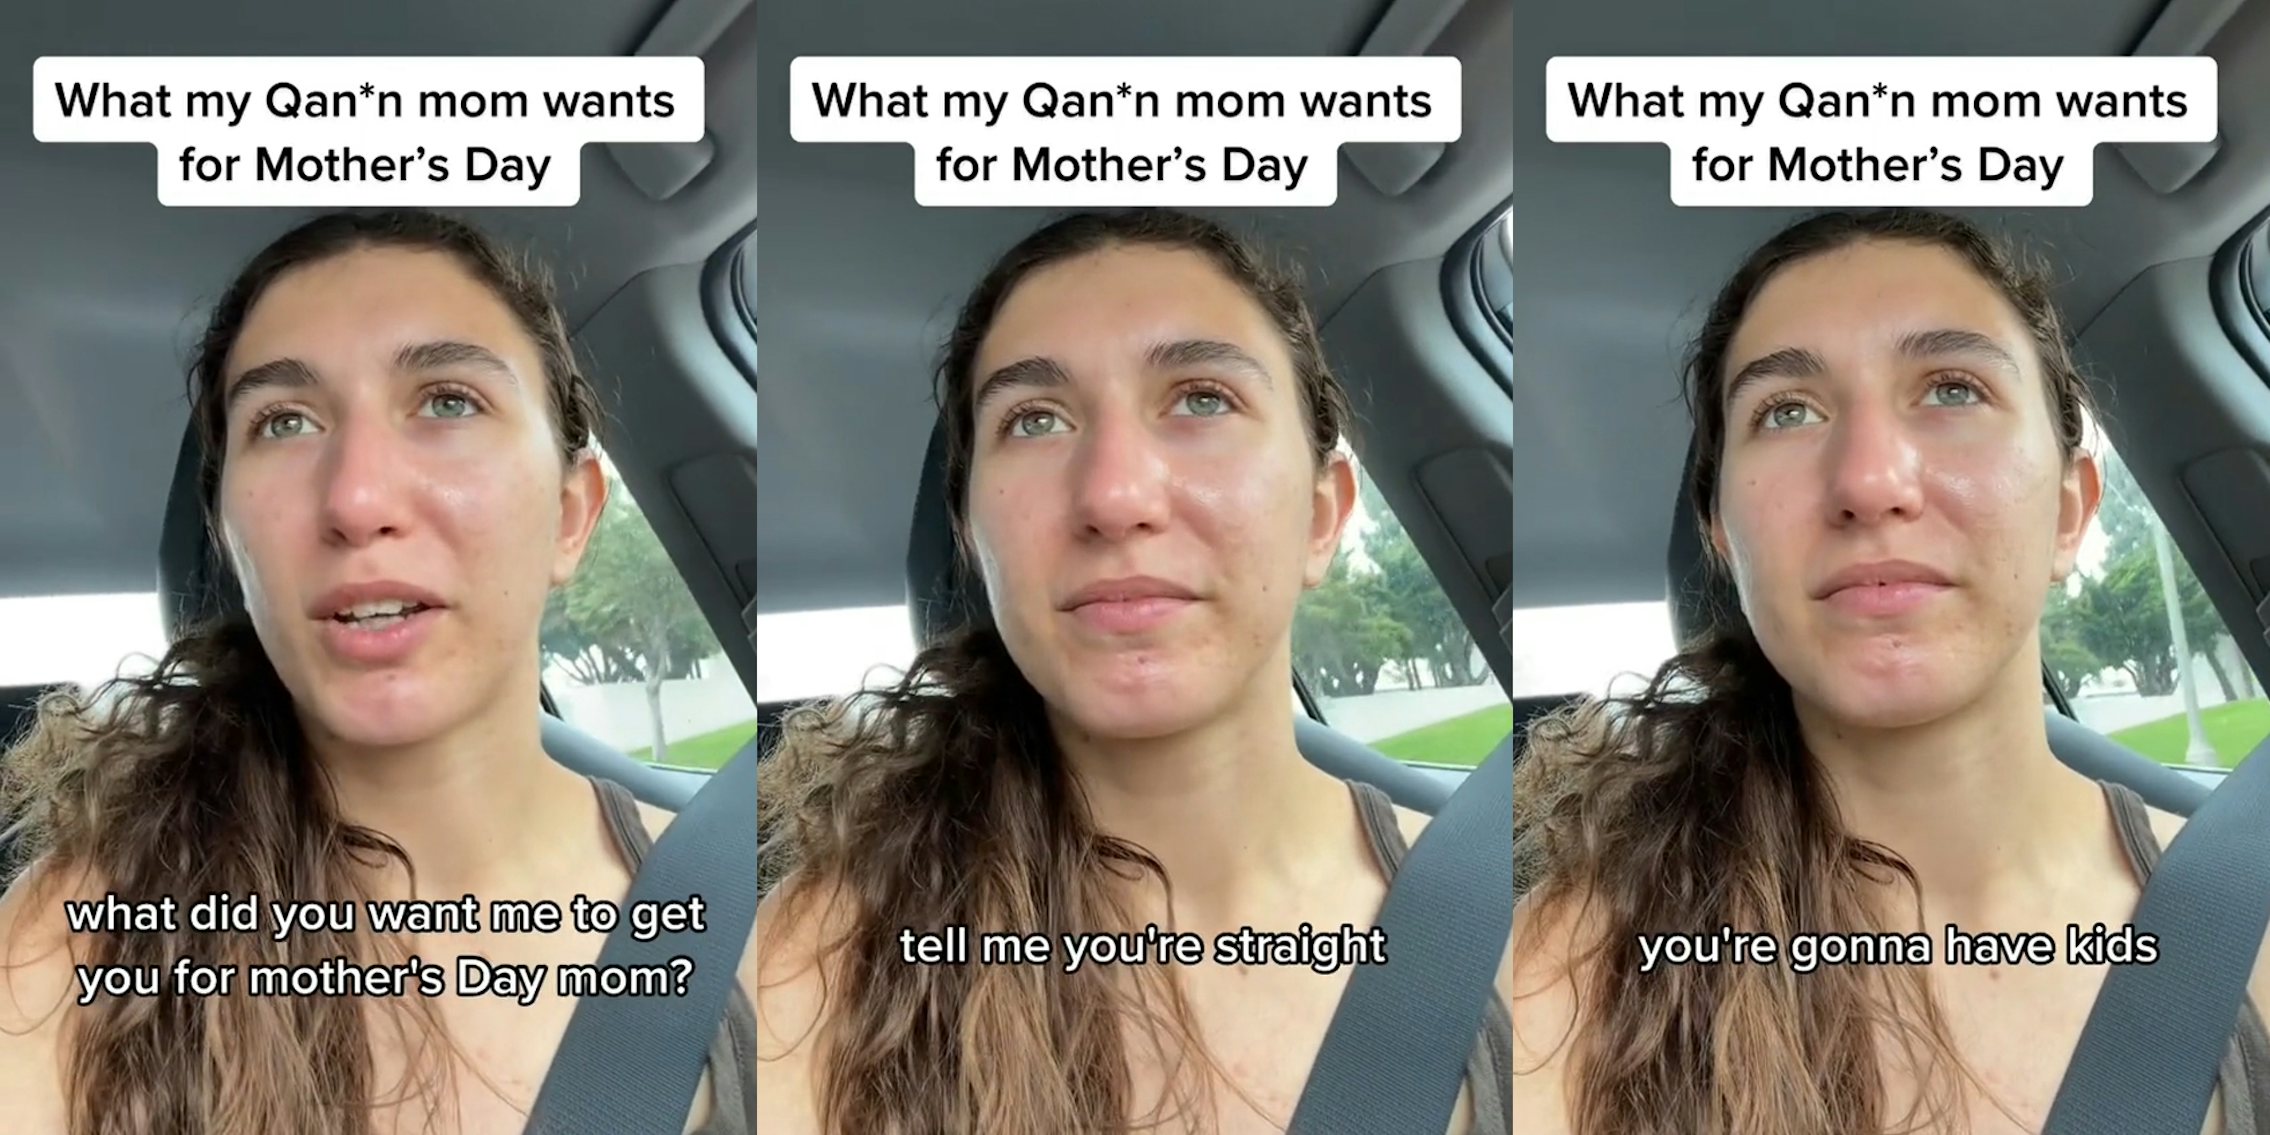 woman in car with caption 'What my QAnon mom wants for Mother's Day' 'what did you want me to get you for mother's day mom?' (l) woman in car with caption 'What my QAnon mom wants for Mother's Day' 'tell me you're straight' (c) woman in car with caption 'What my QAnon mom wants for Mother's Day' 'you're gonna have kids' (r)